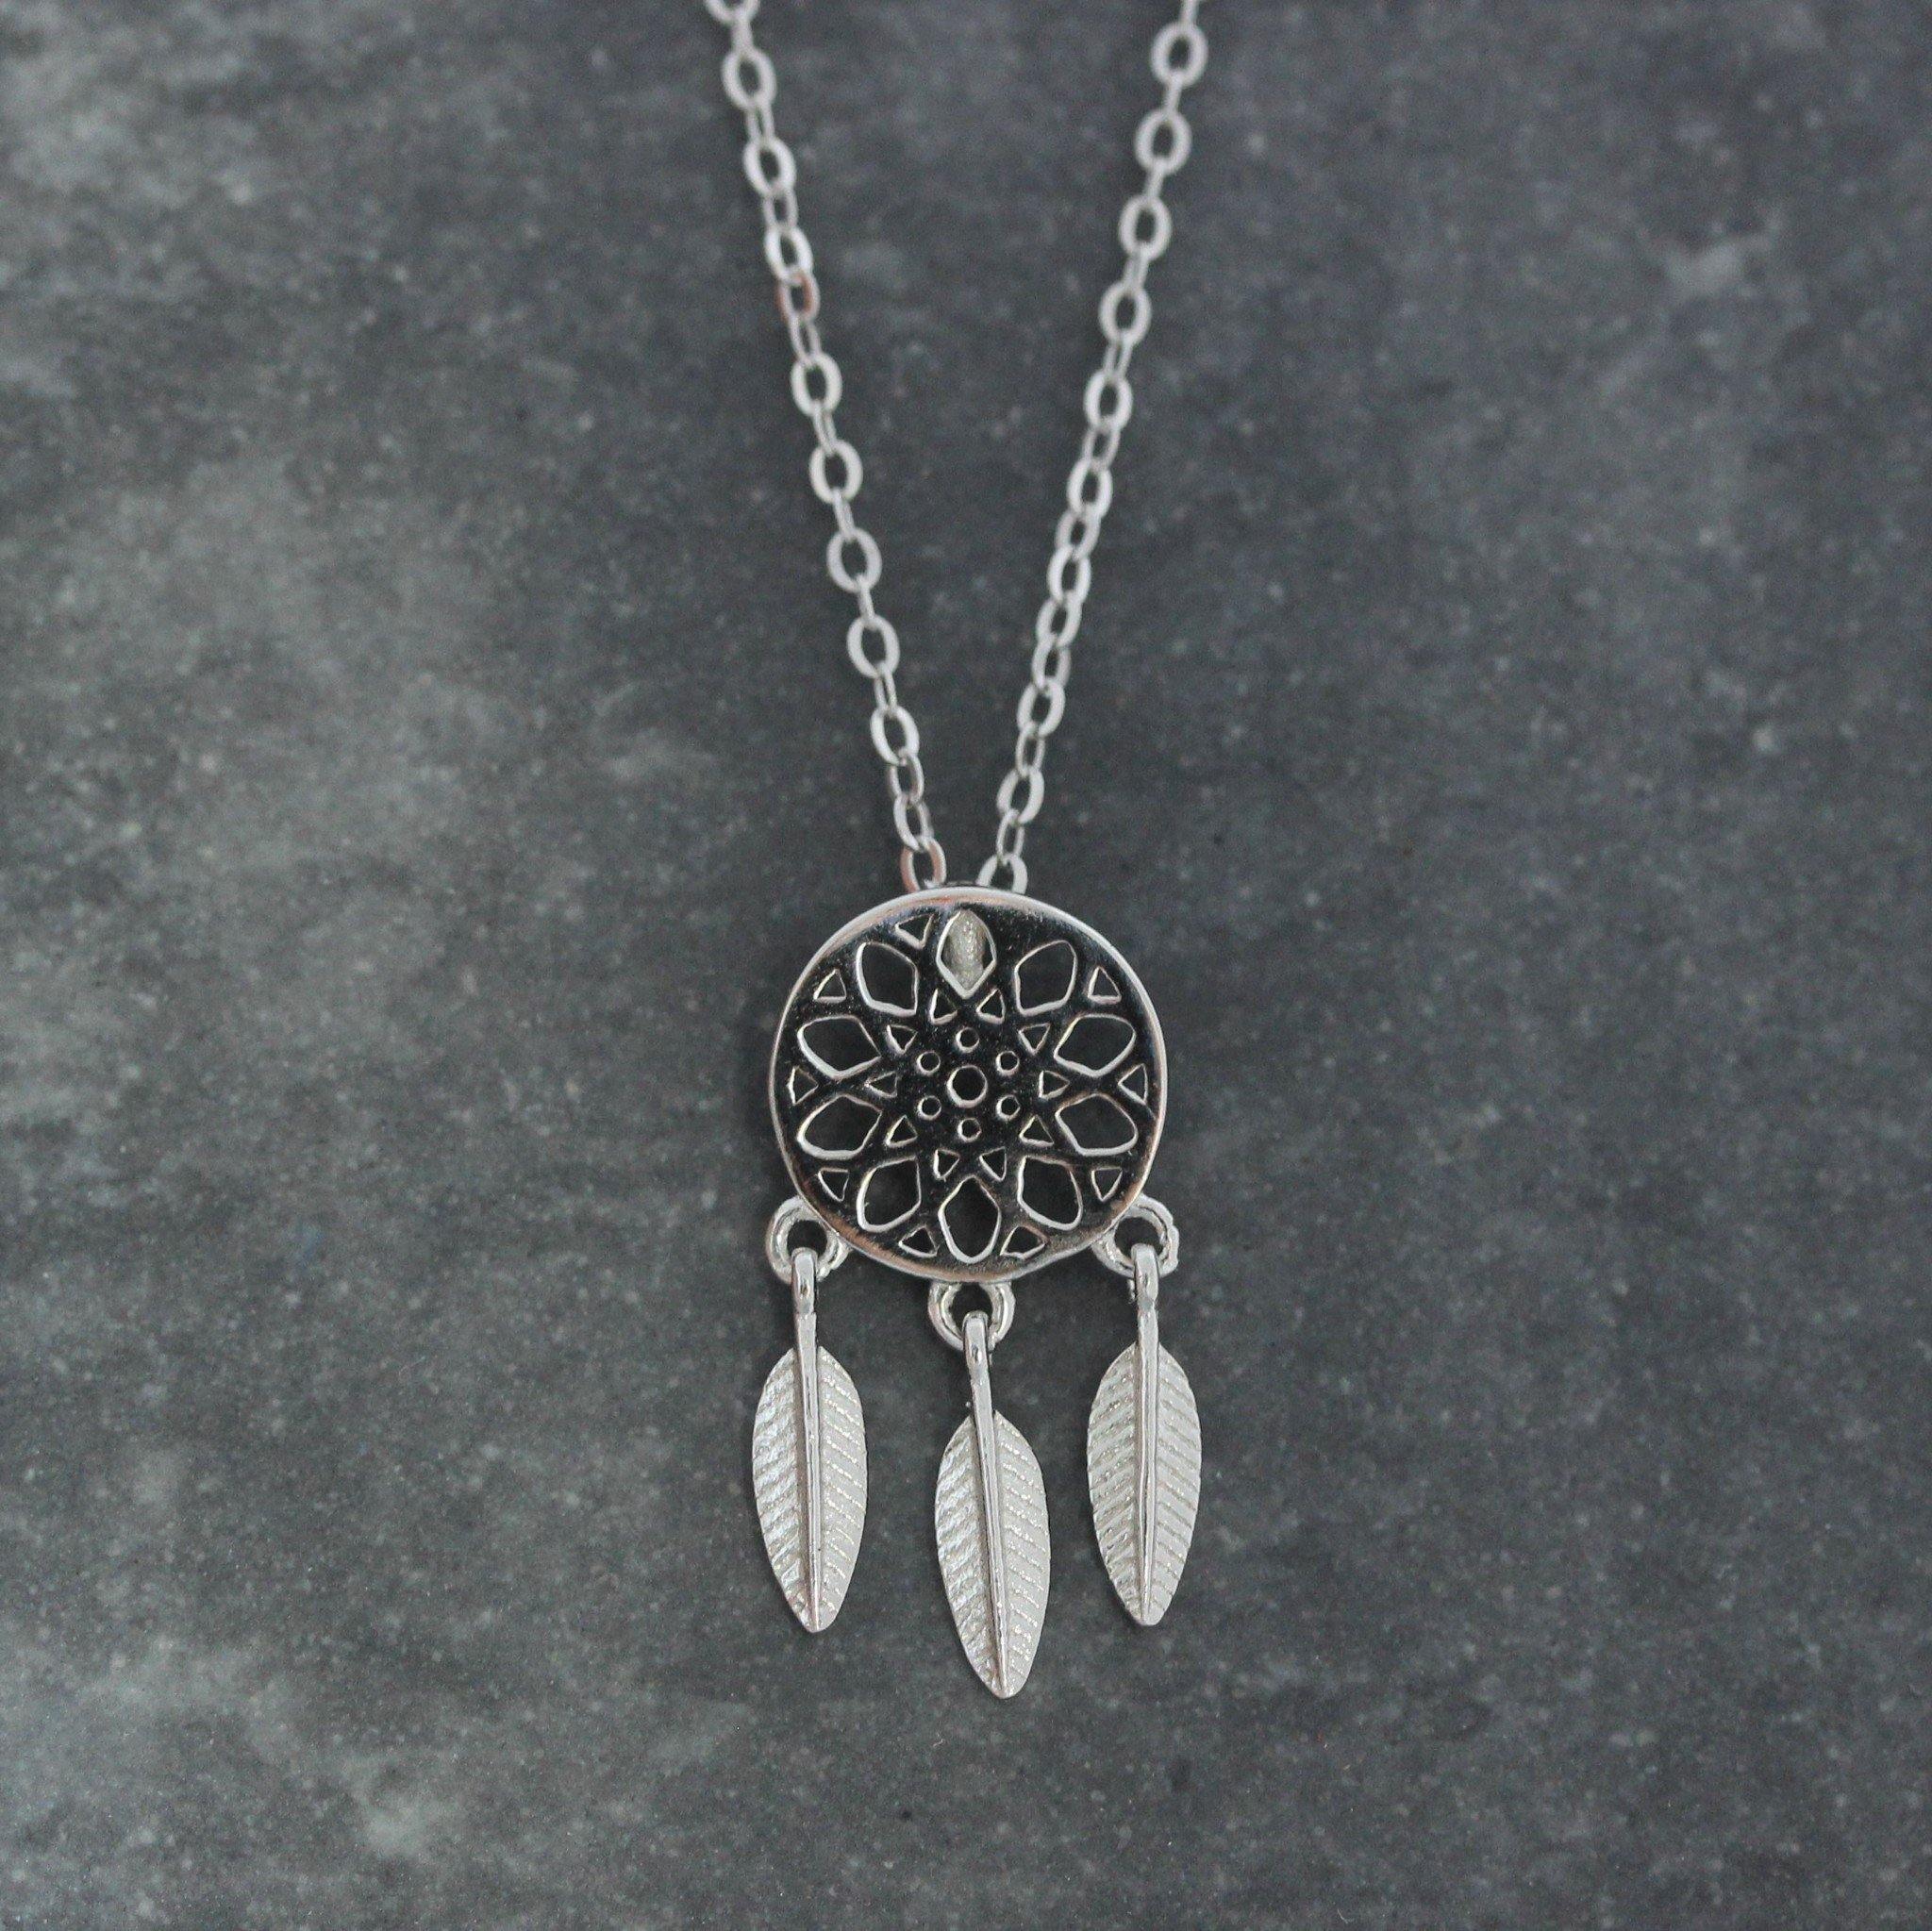 Sterling Silver Small Dream Catcher Feather Pendant Necklace 41cm + 4cm Ext - STERLING SILVER DESIGNS